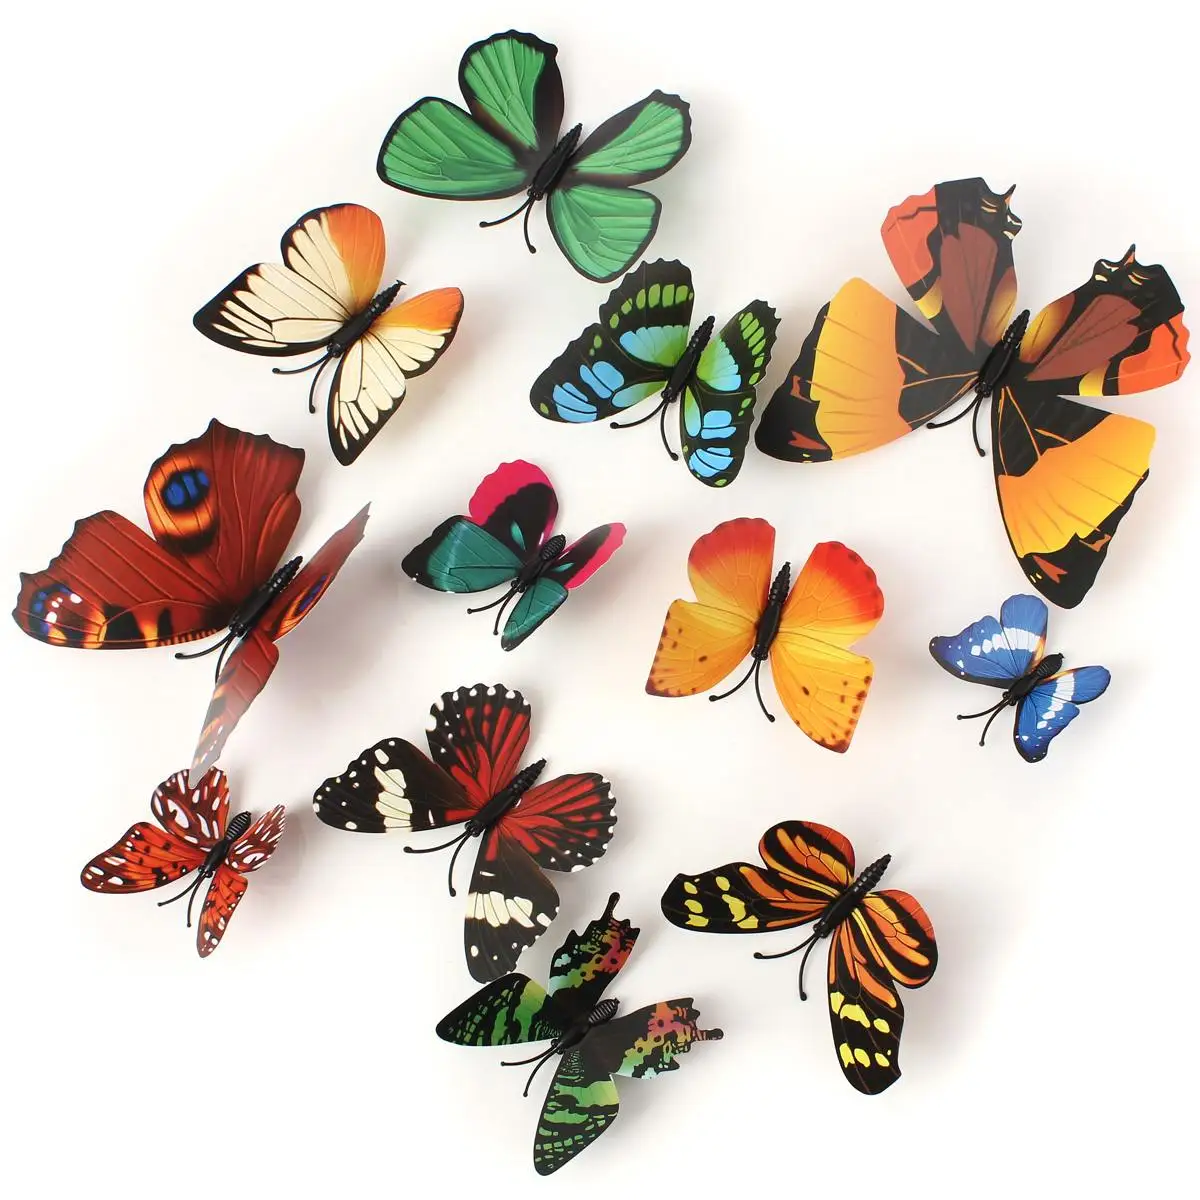 

12PCS/Lot Artificial Butterfly Garden Decorations Simulation Butterfly Stakes Yard Plant Lawn Decor Fake Butterefly Random Color